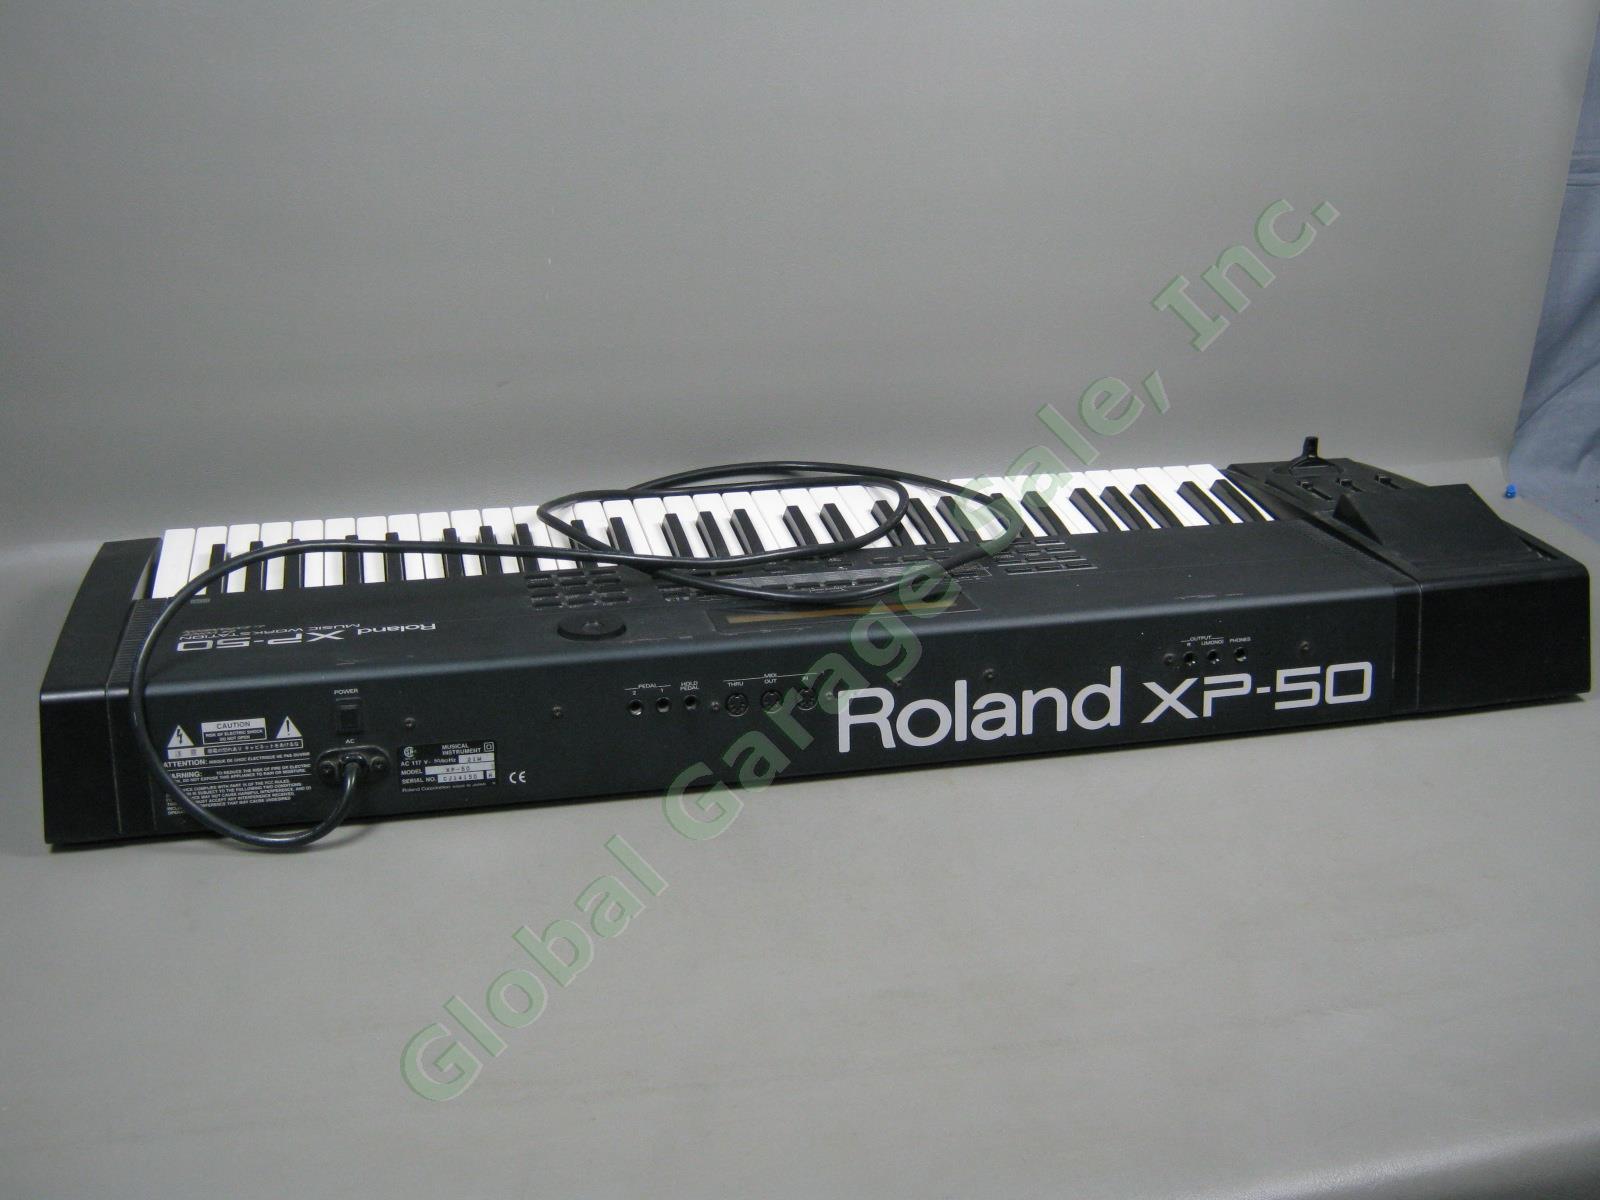 Roland XP-50 Music Workstation 64 Voice 4x Expansion Synthesizer Keyboard +Pedal 7